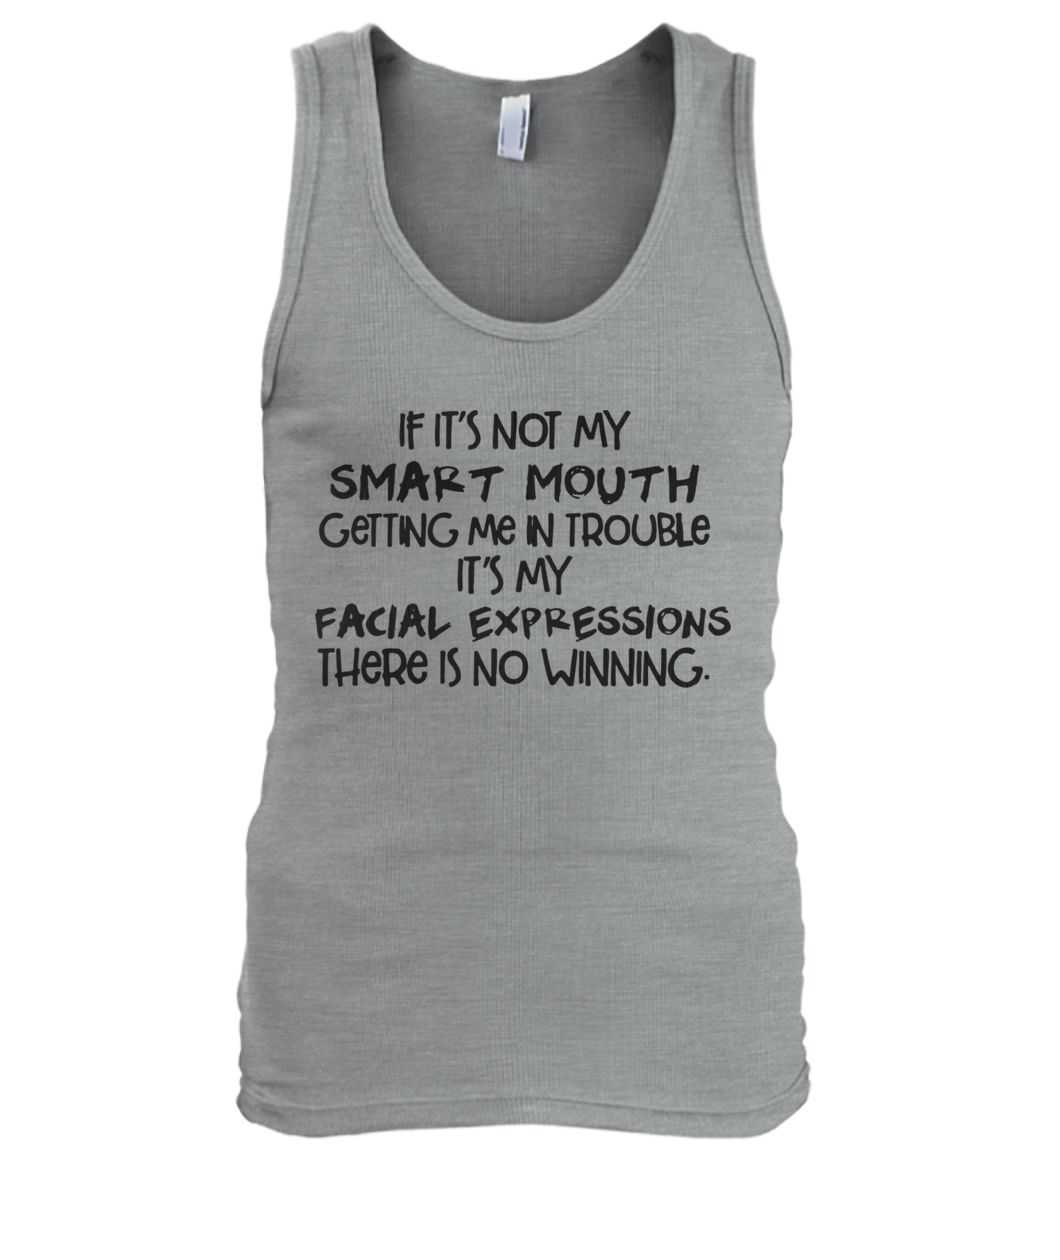 If it's not my smart mouth getting me in trouble it's my facial expressions men's tank top